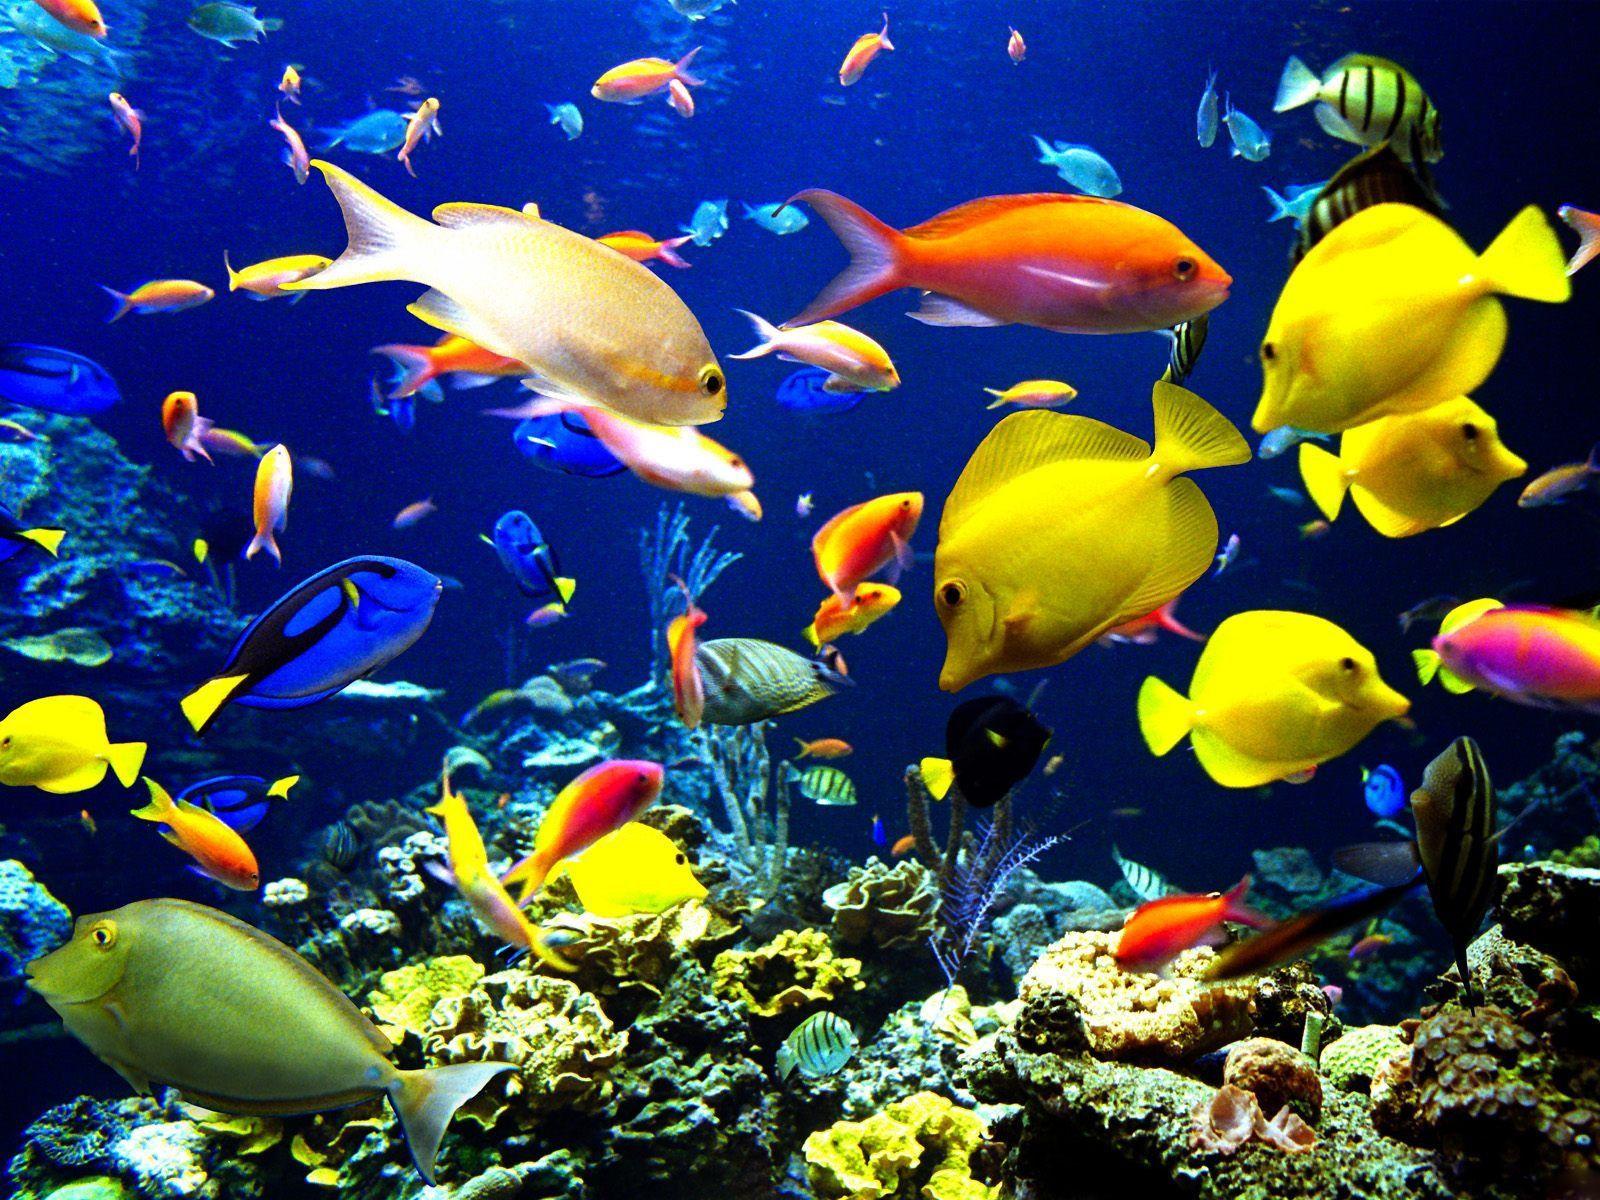 20,000+ Best Free Fish Images & Pictures in HD - Pixabay